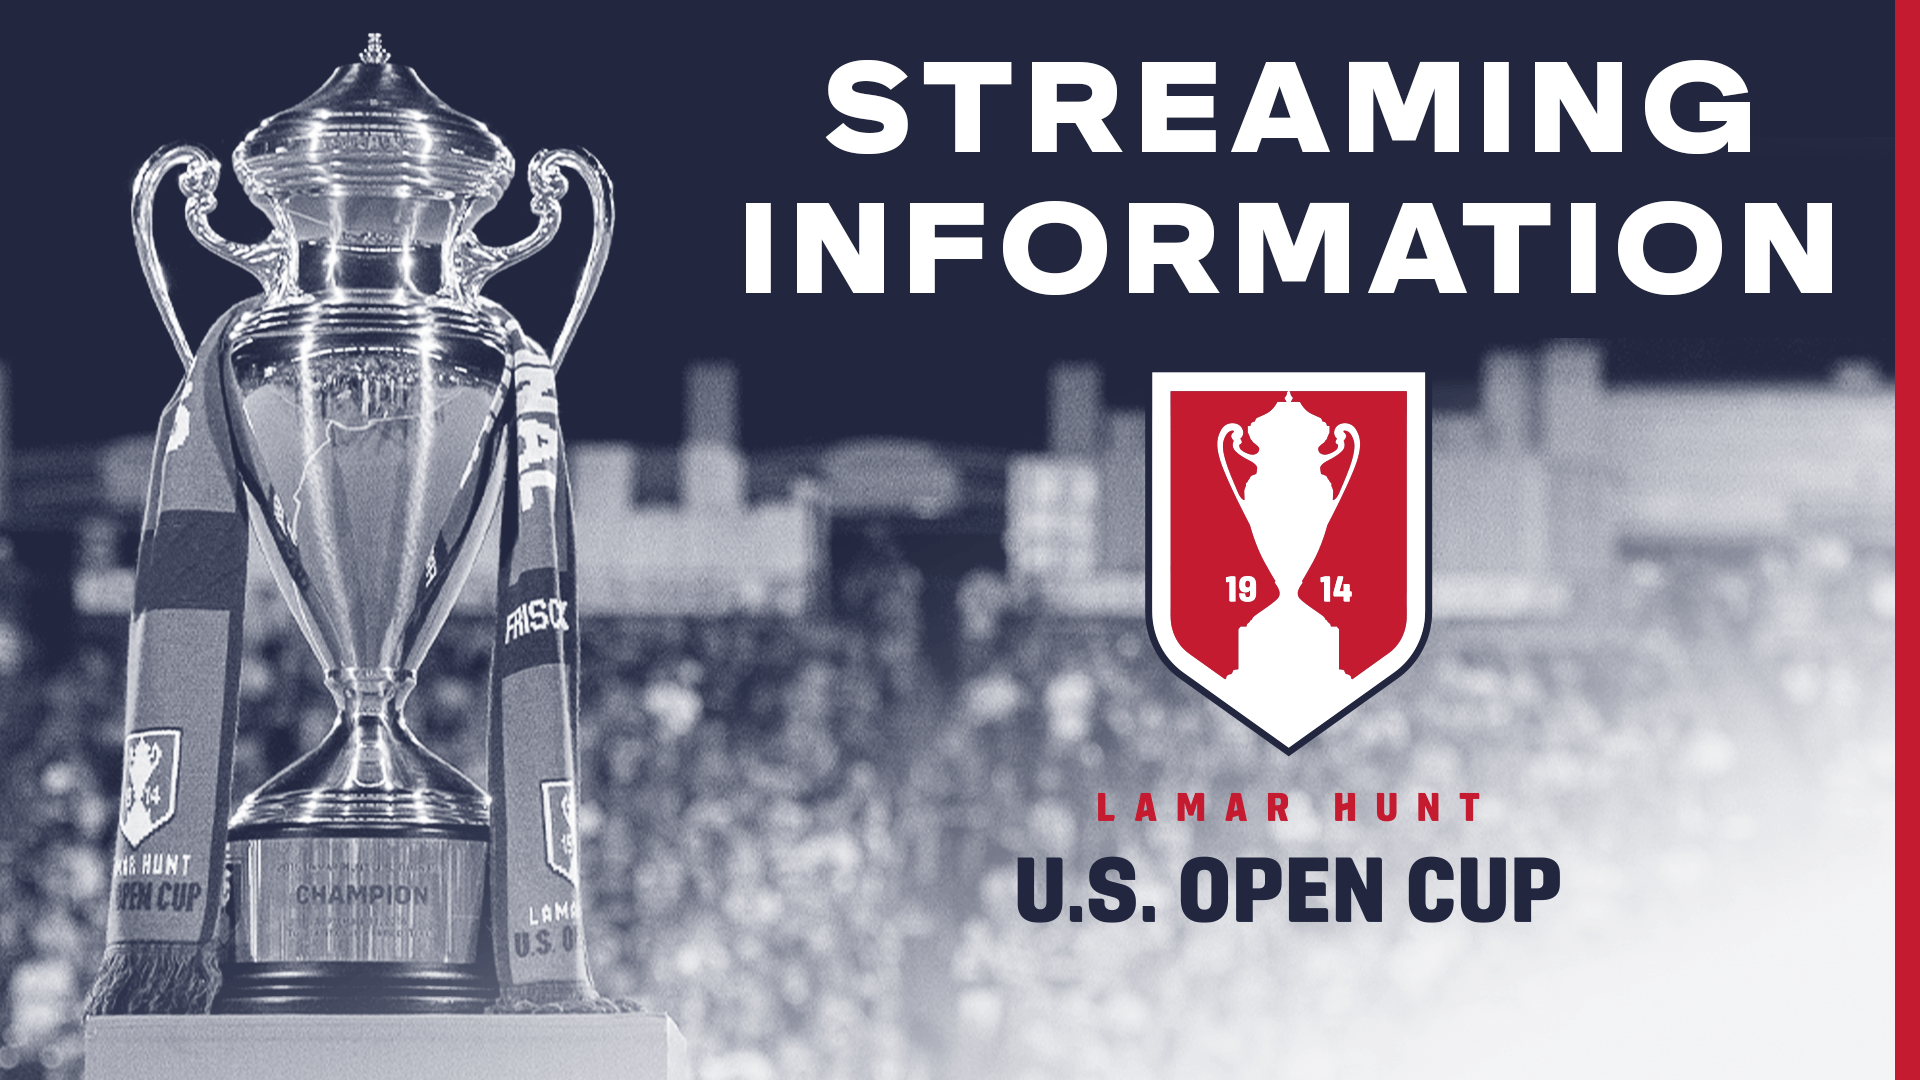 How to watch and stream 2022 U.S